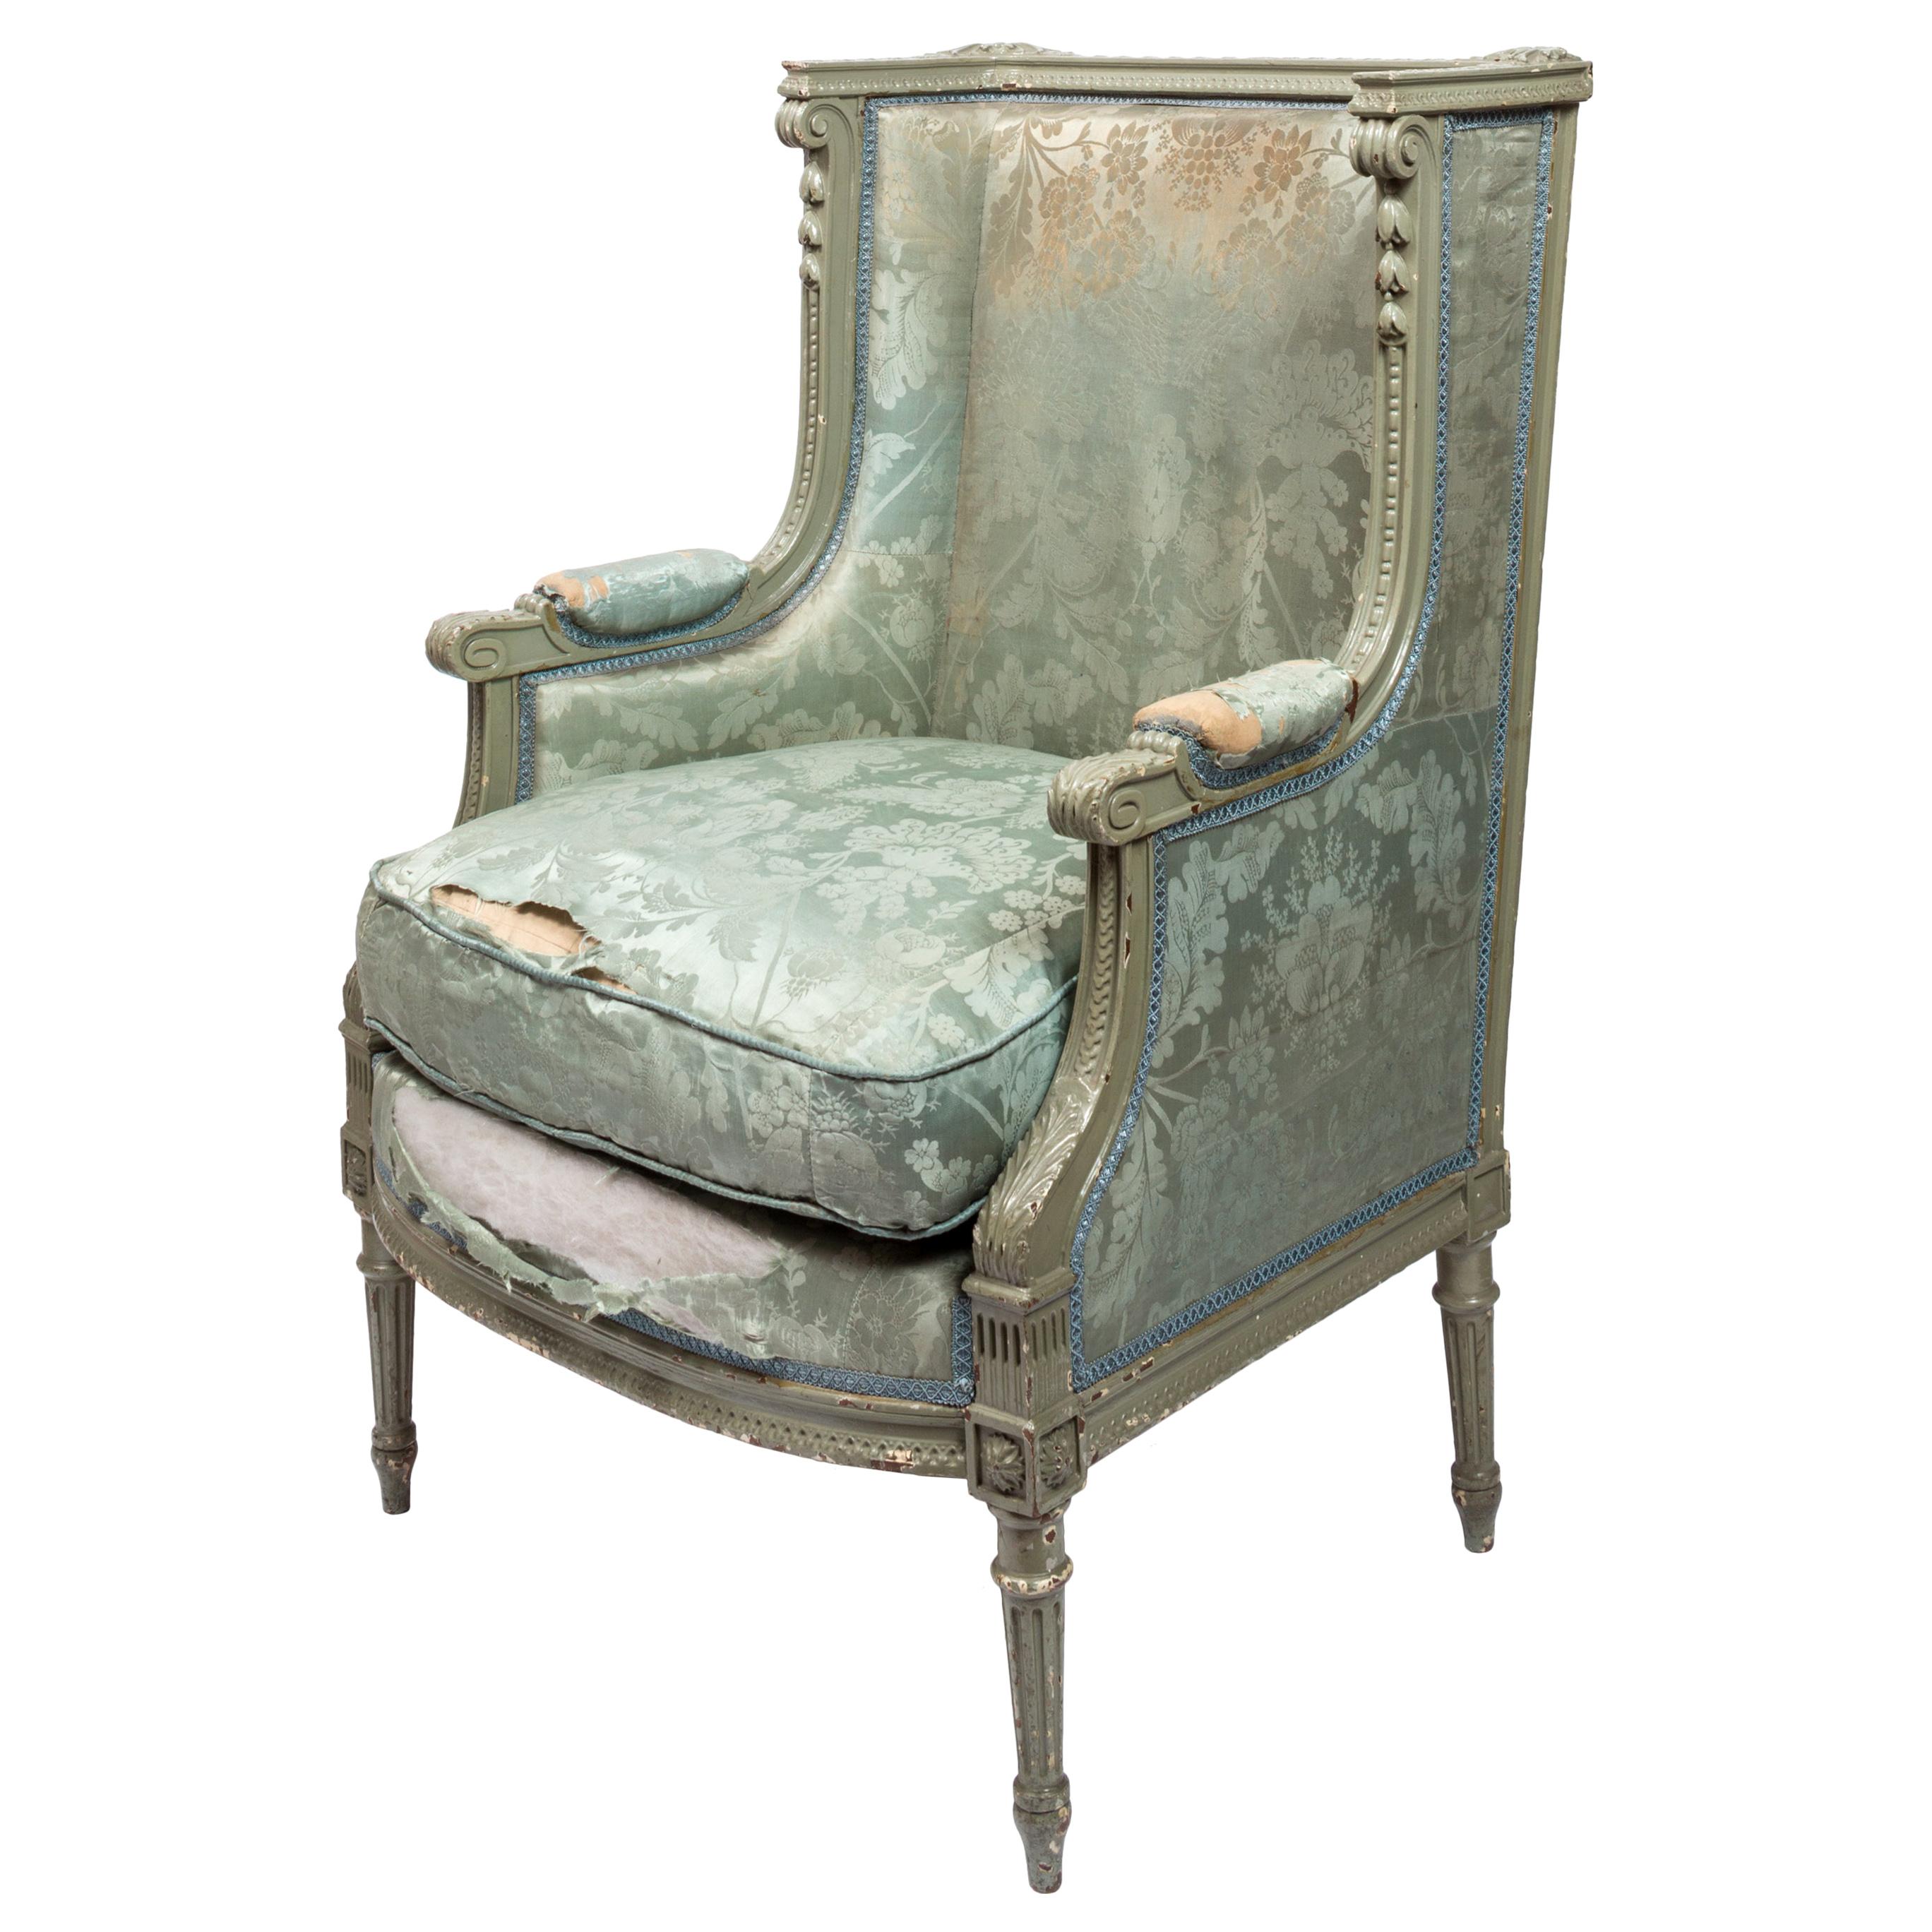 French Louis XVI Style Bergère Armchair with Distressed Fabric